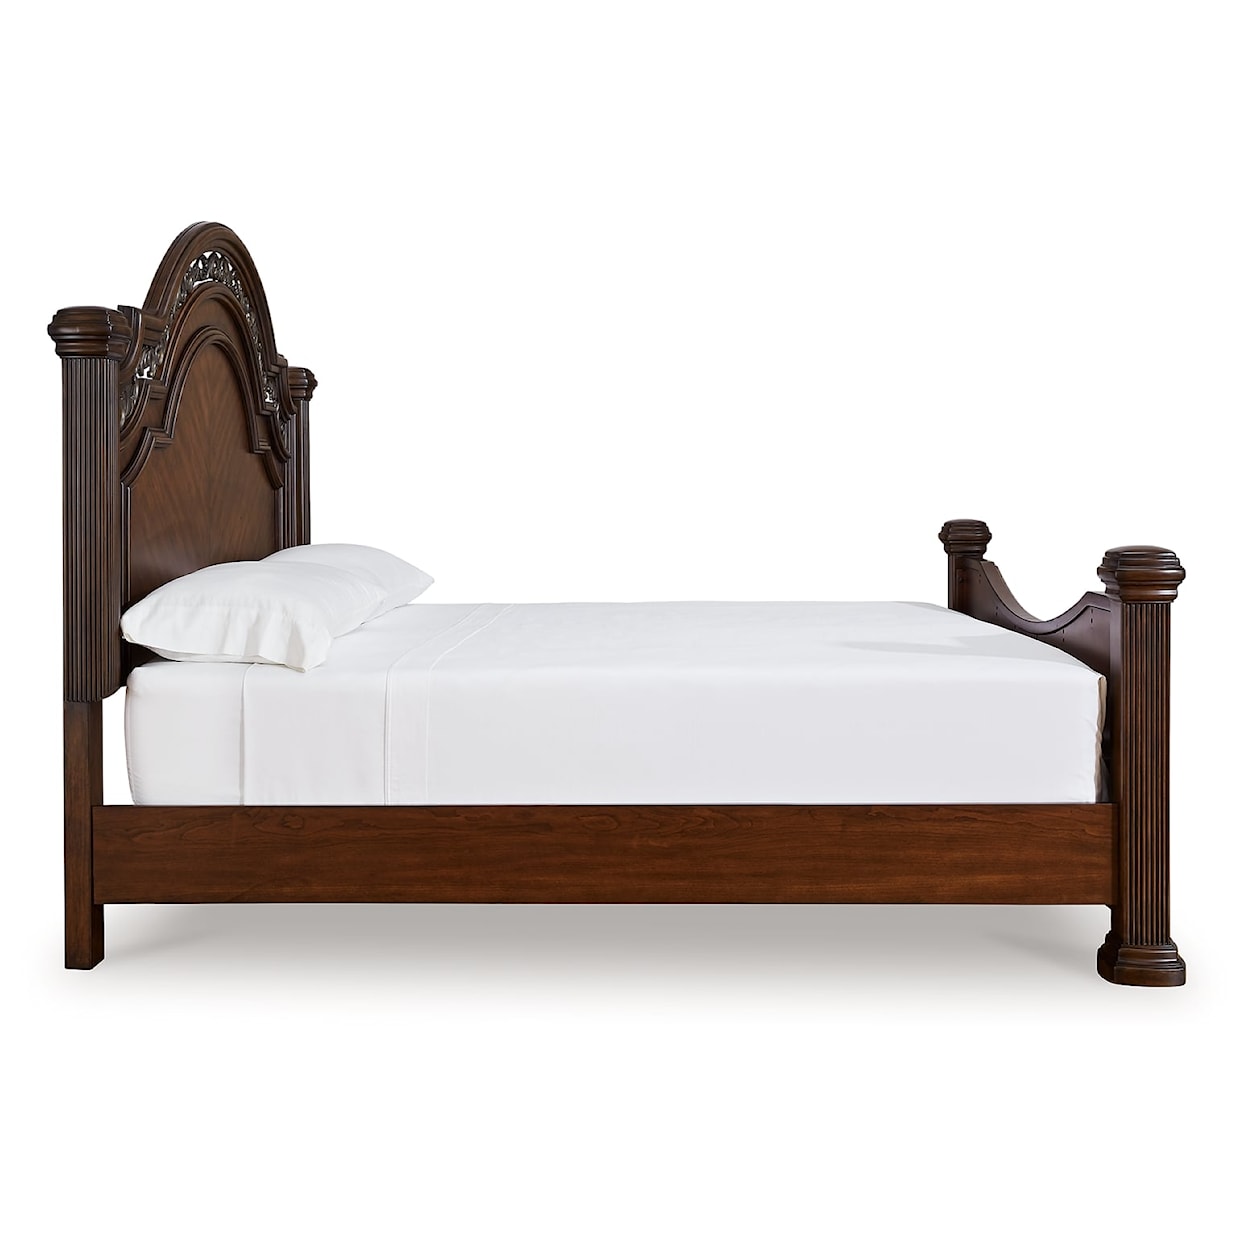 Signature Design by Ashley Furniture Lavinton Queen Poster Bed